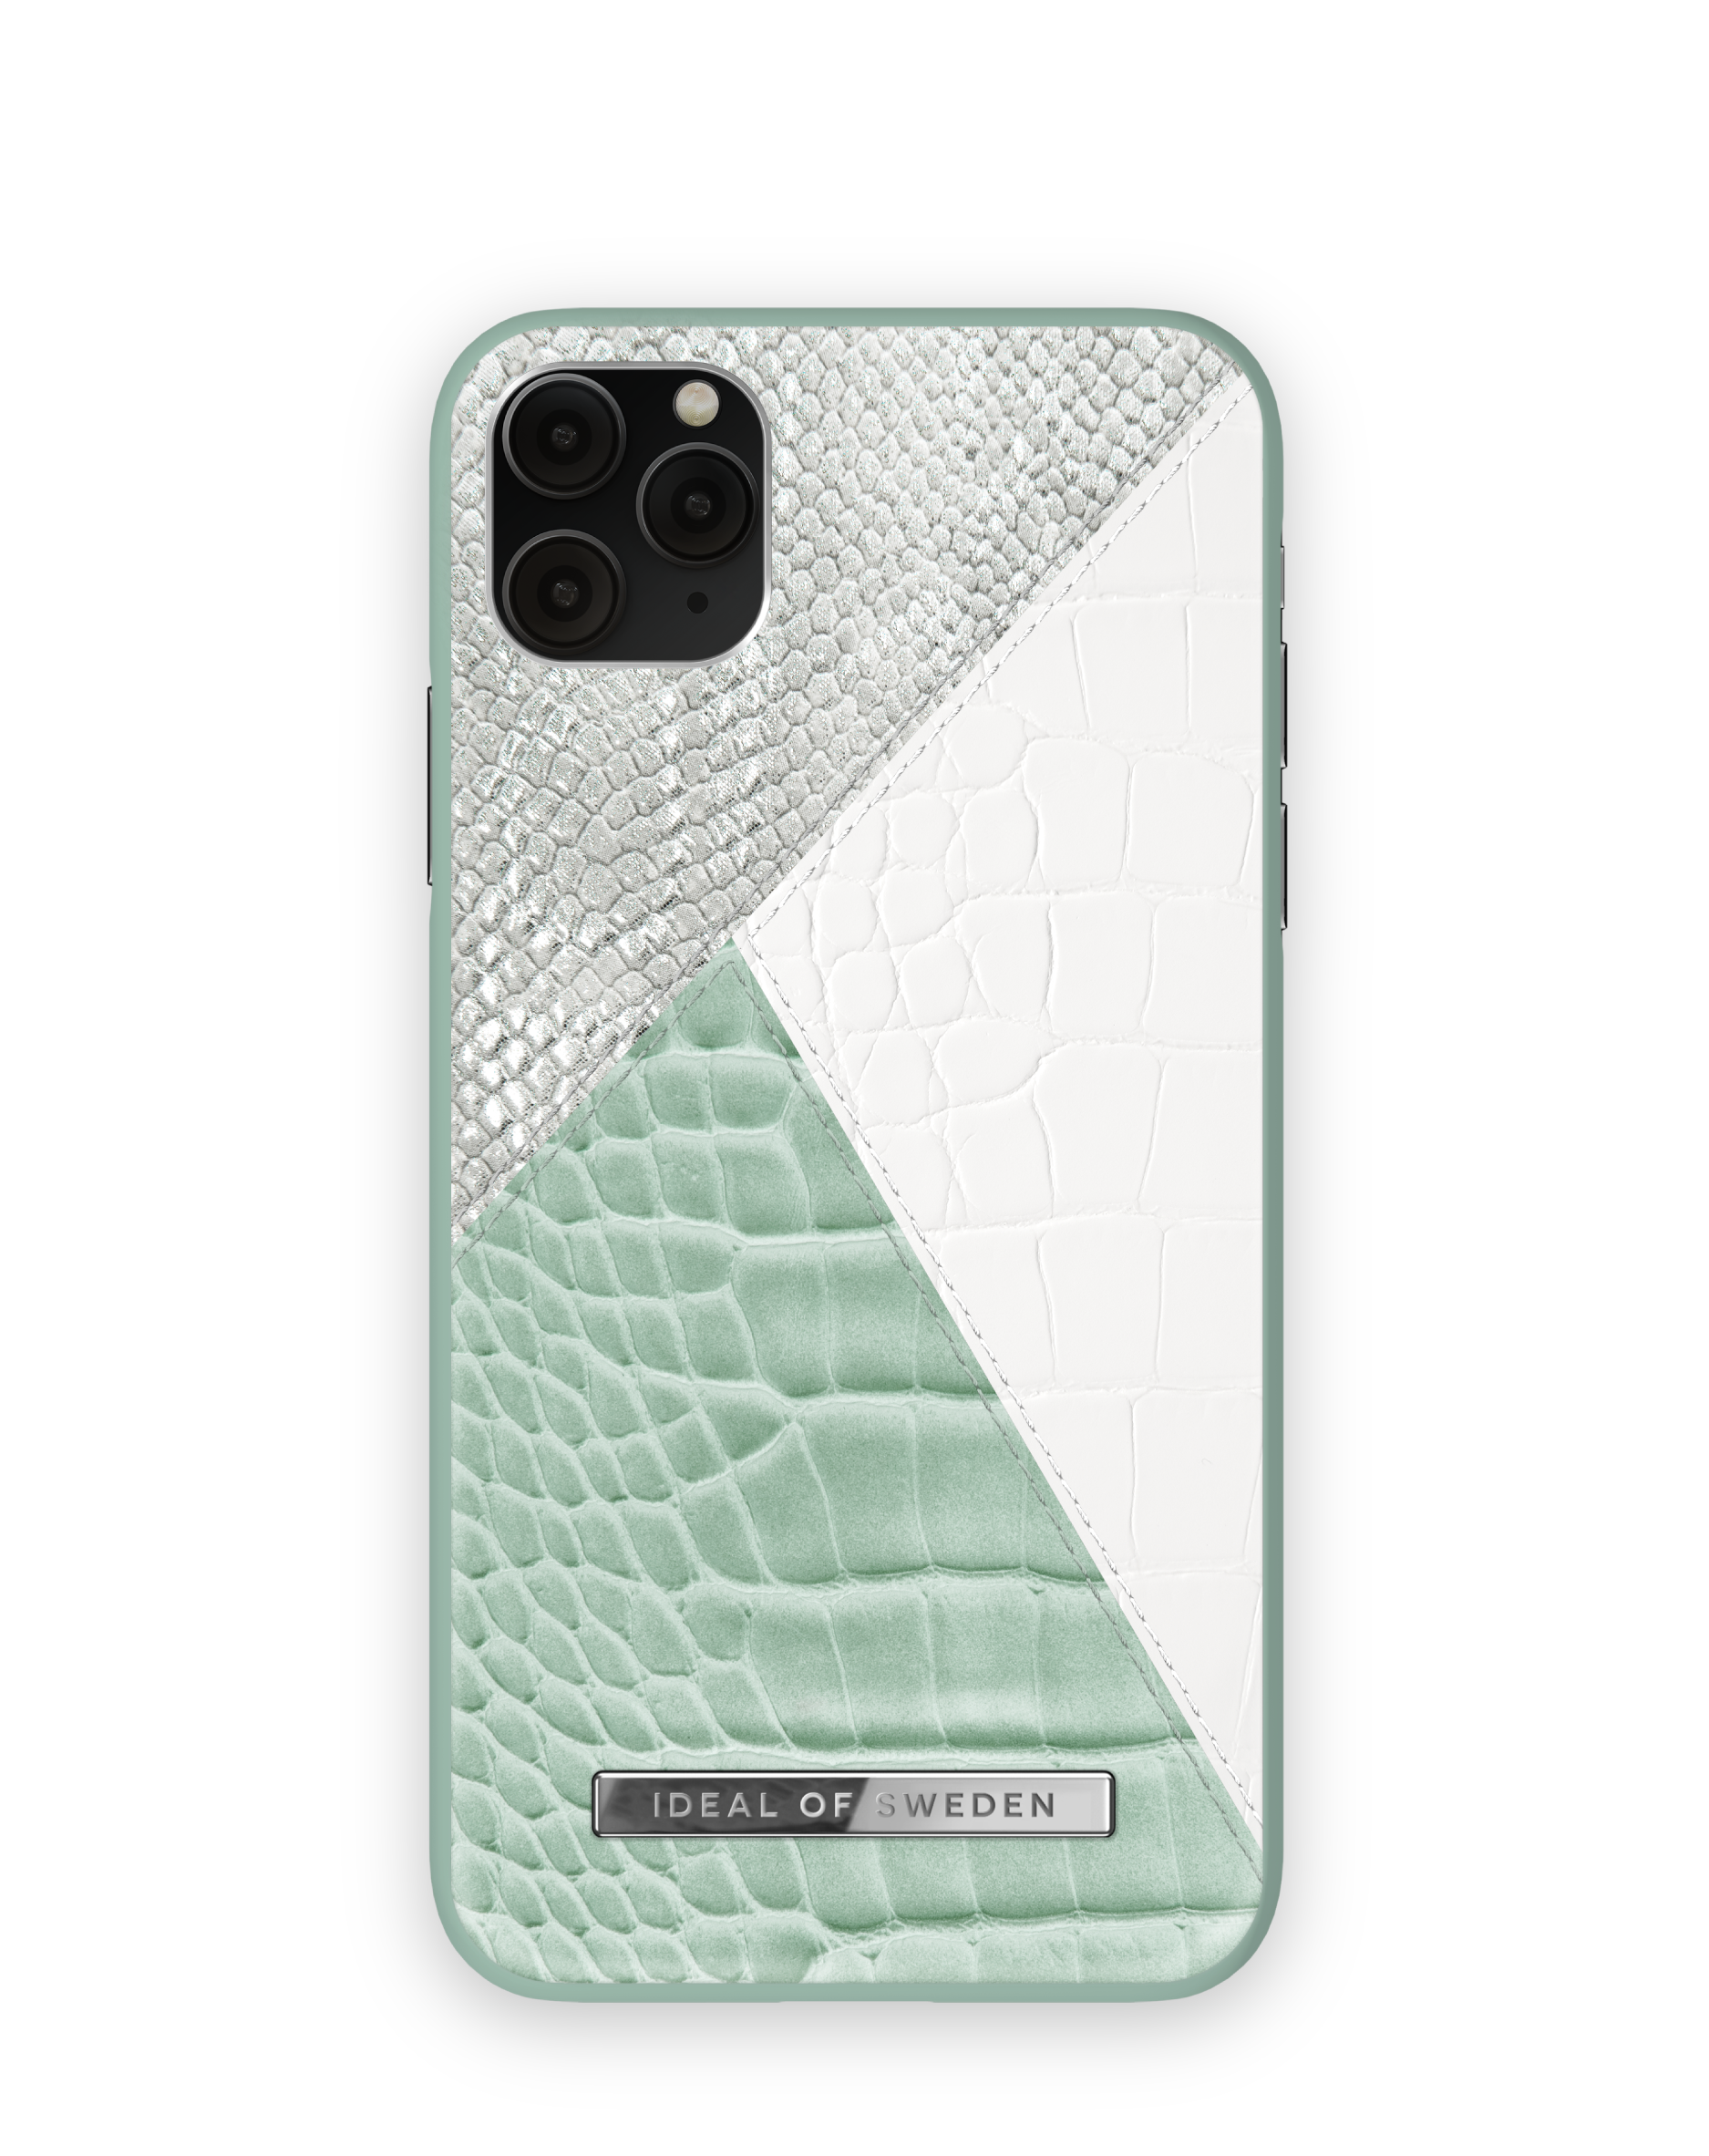 Snake 11 OF iPhone XS Mint Palladian Apple Backcover, Pro SWEDEN iPhone Max, IDEAL Apple, Max, Apple IDACSS21-I1965-268,